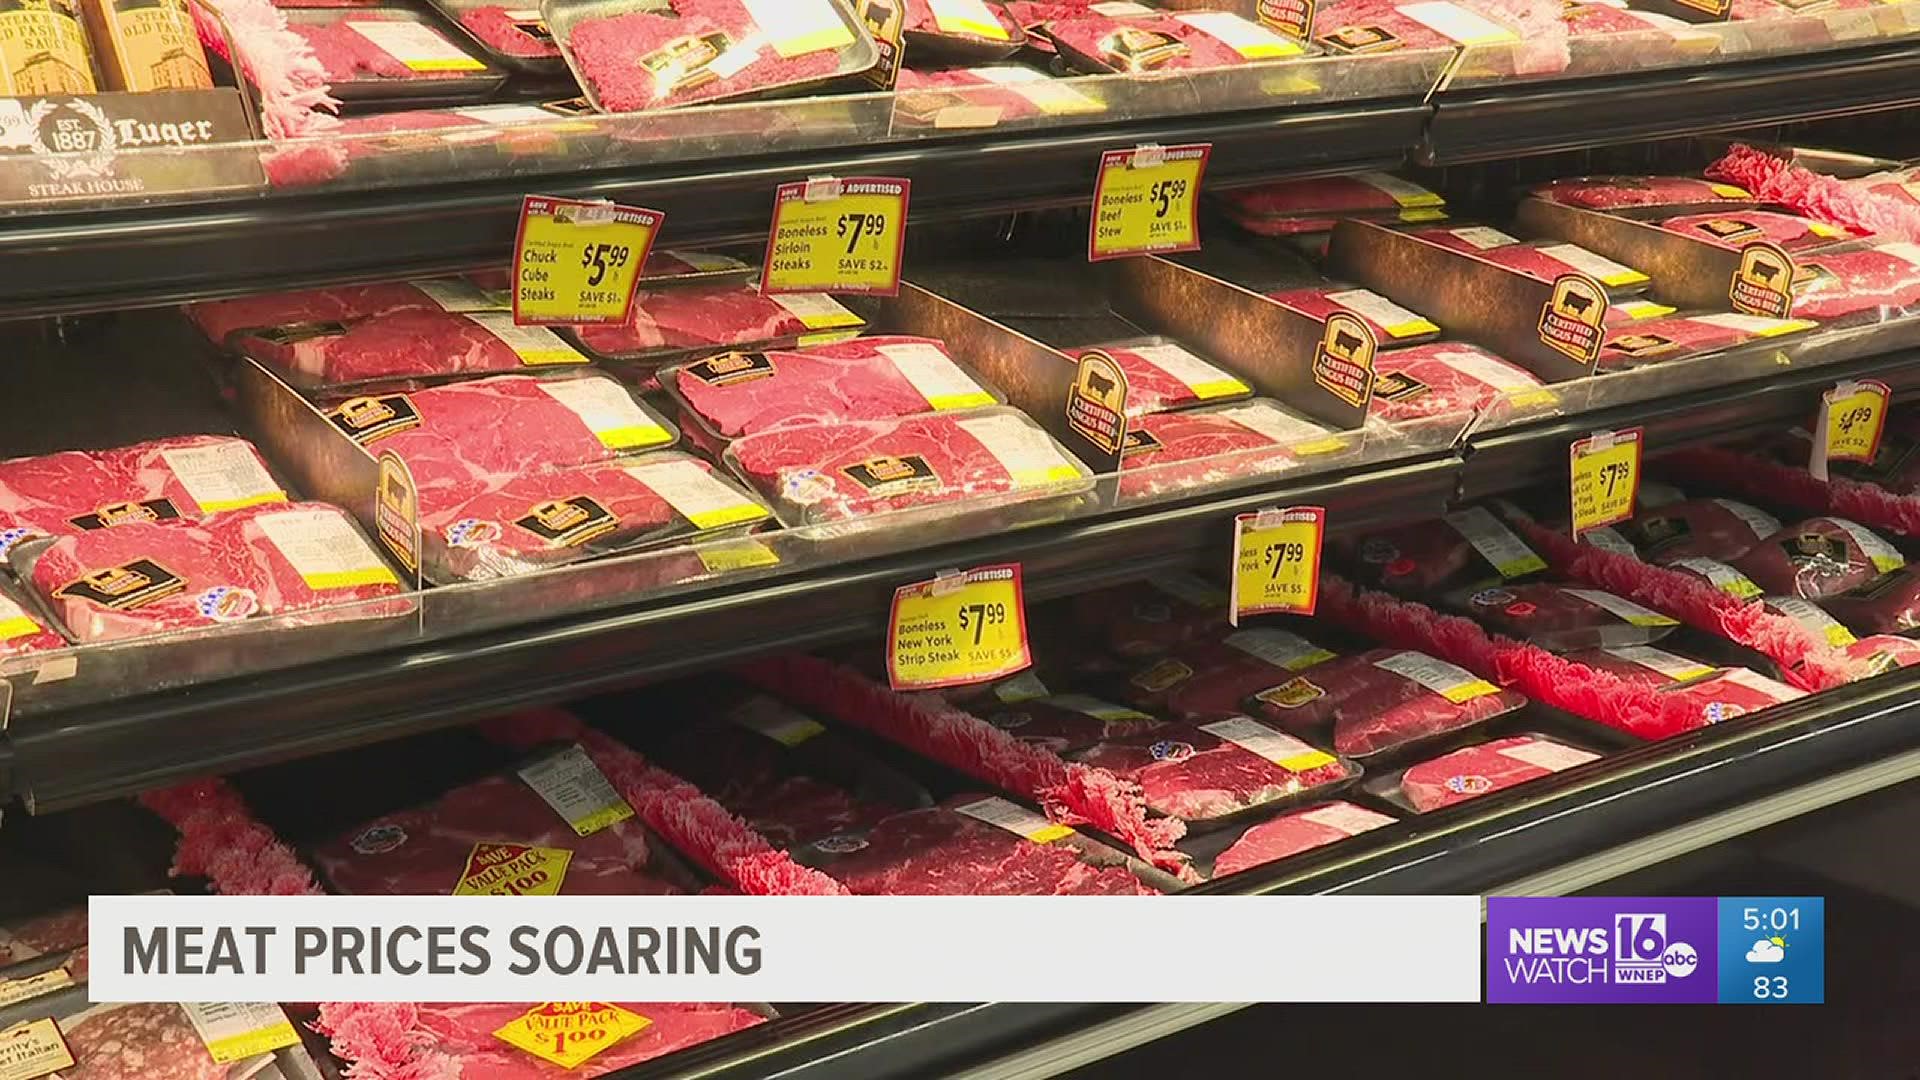 Local grocery stores tell Newswatch 16's Rose Itzcovitz that prices are going up for them, and they're doing what they can to keep things affordable for shoppers.